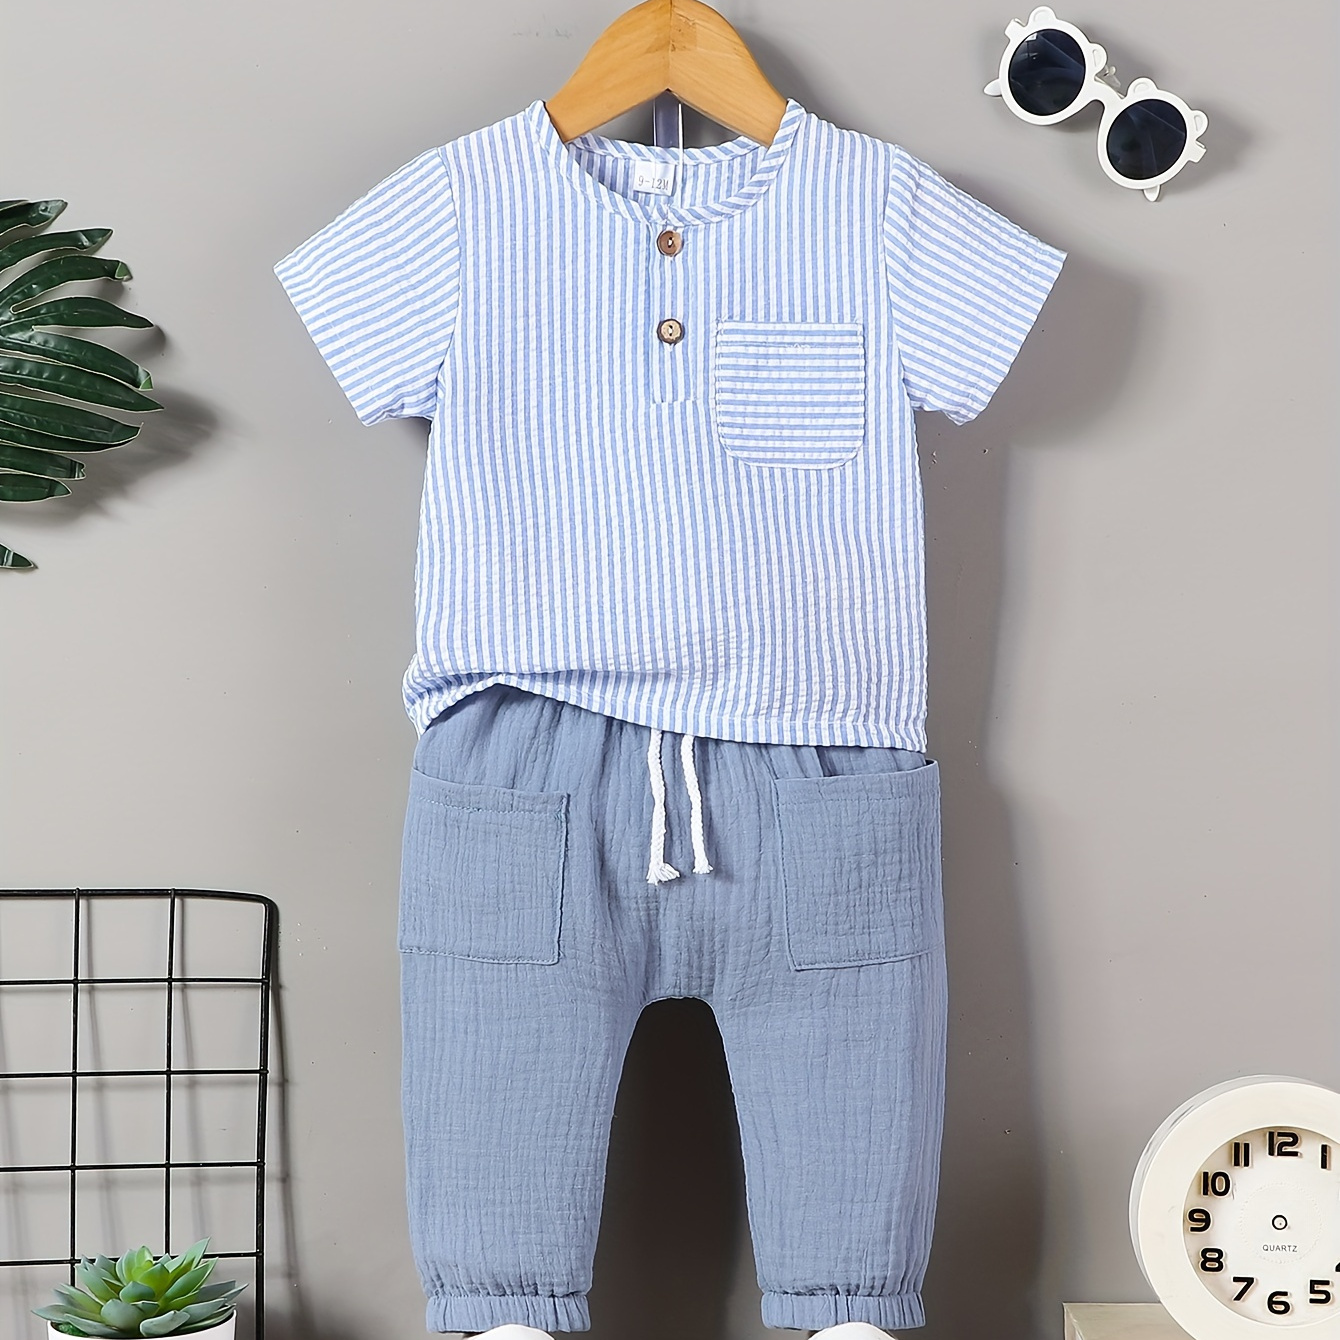 

2pcs Baby's Vertical Stripe Pattern Short Sleeve T-shirt & Casual Pockets Patched Pants Set, Infant & Toddler Boy's Clothes For Spring Summer Daily Wear